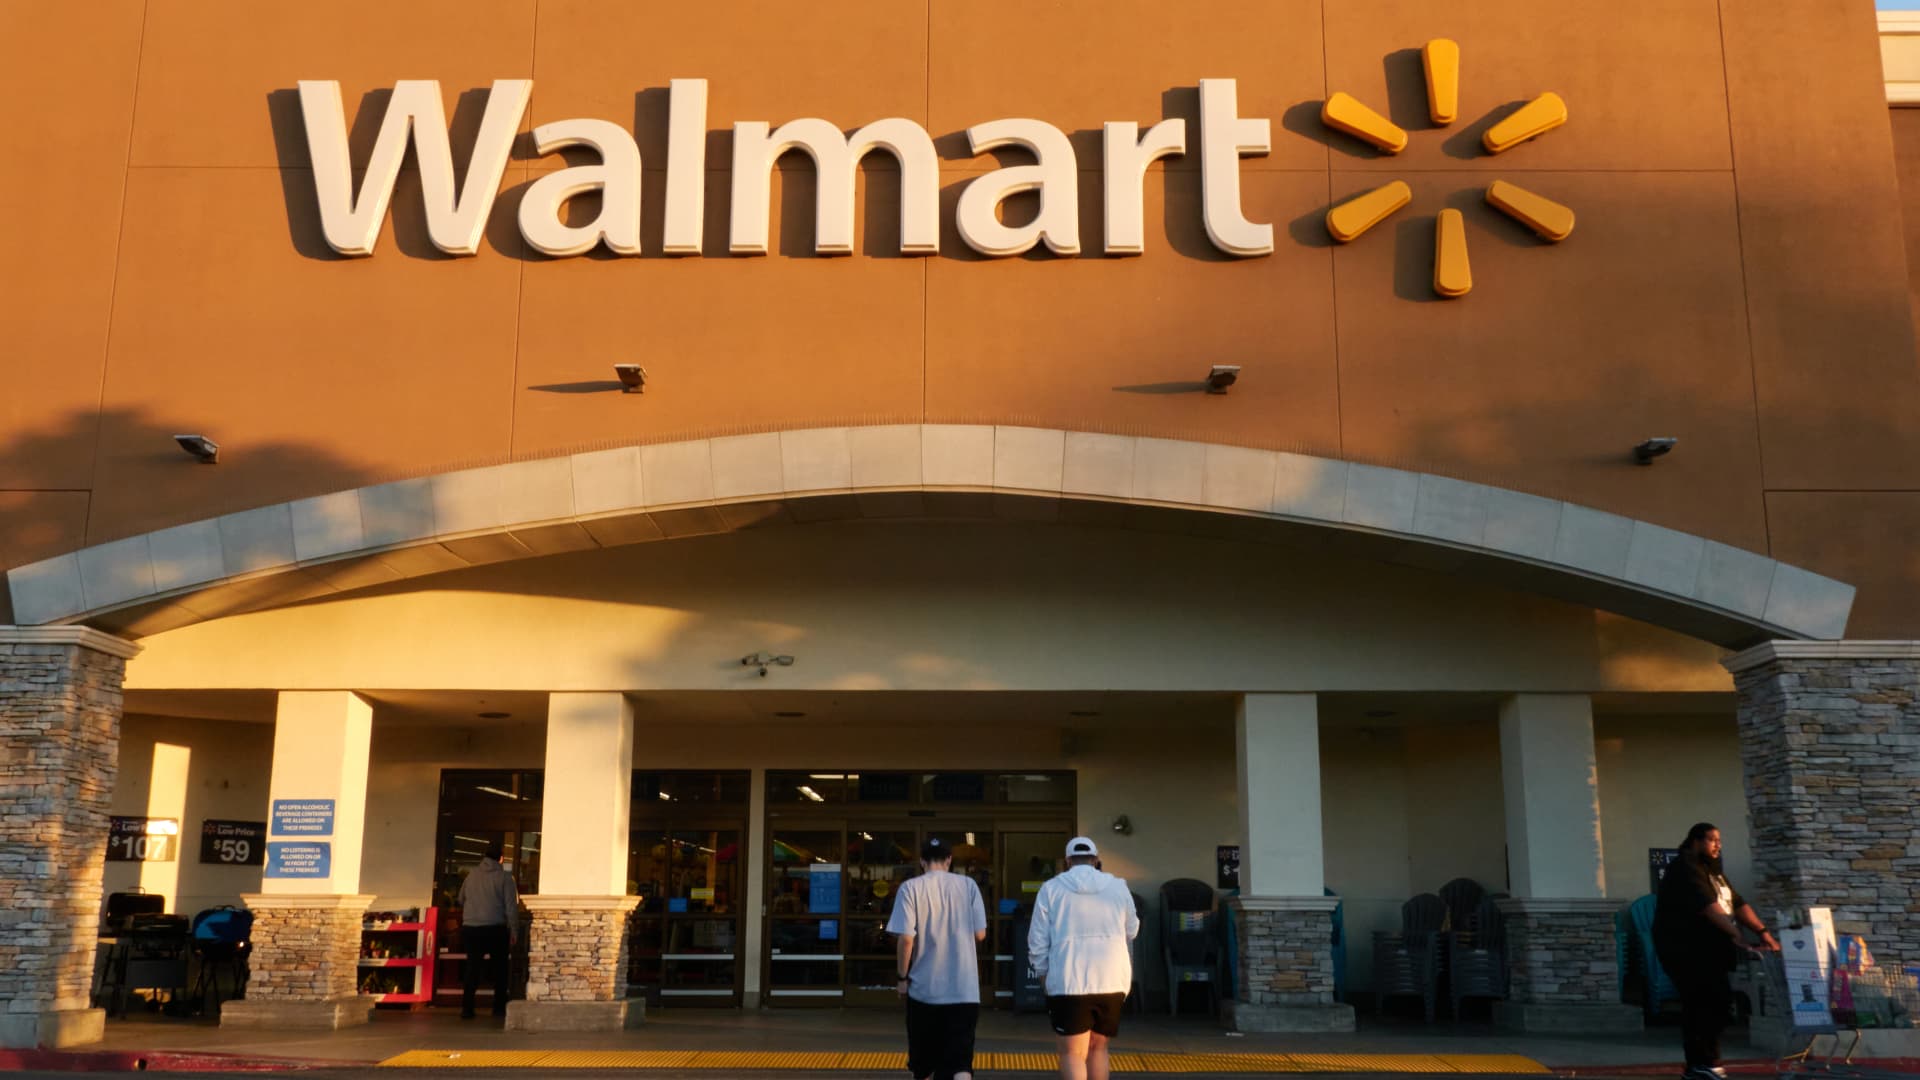 Walmart expands abortion coverage for its employees in the wake of Roe v Wade decision